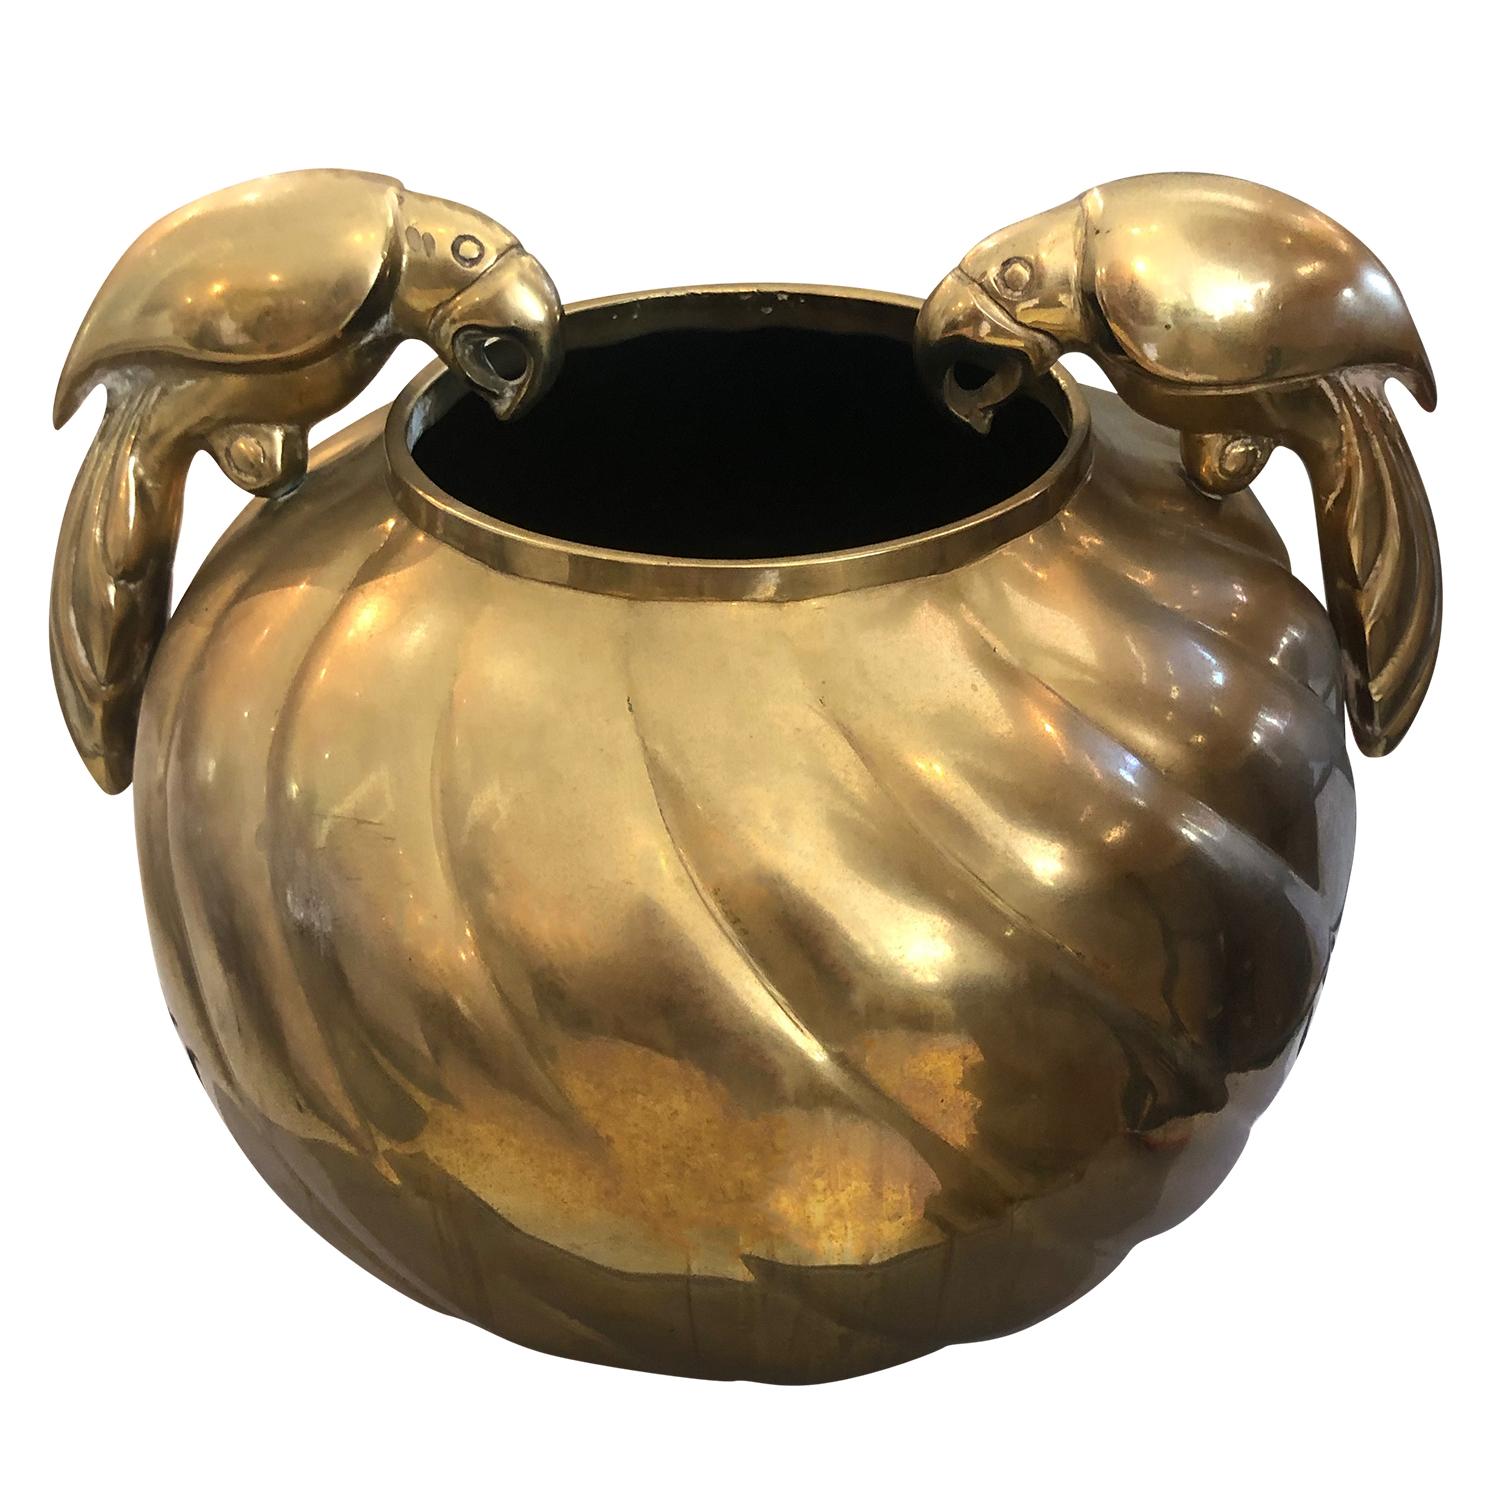 A vintage Mid-Century Modern American ribbed vase made of brass, the lines are softly carved, and set against to the Stark edges. Decorated with two parrots in the manner of Sergio Bustamante, in good condition. Wear consistent with age and use,